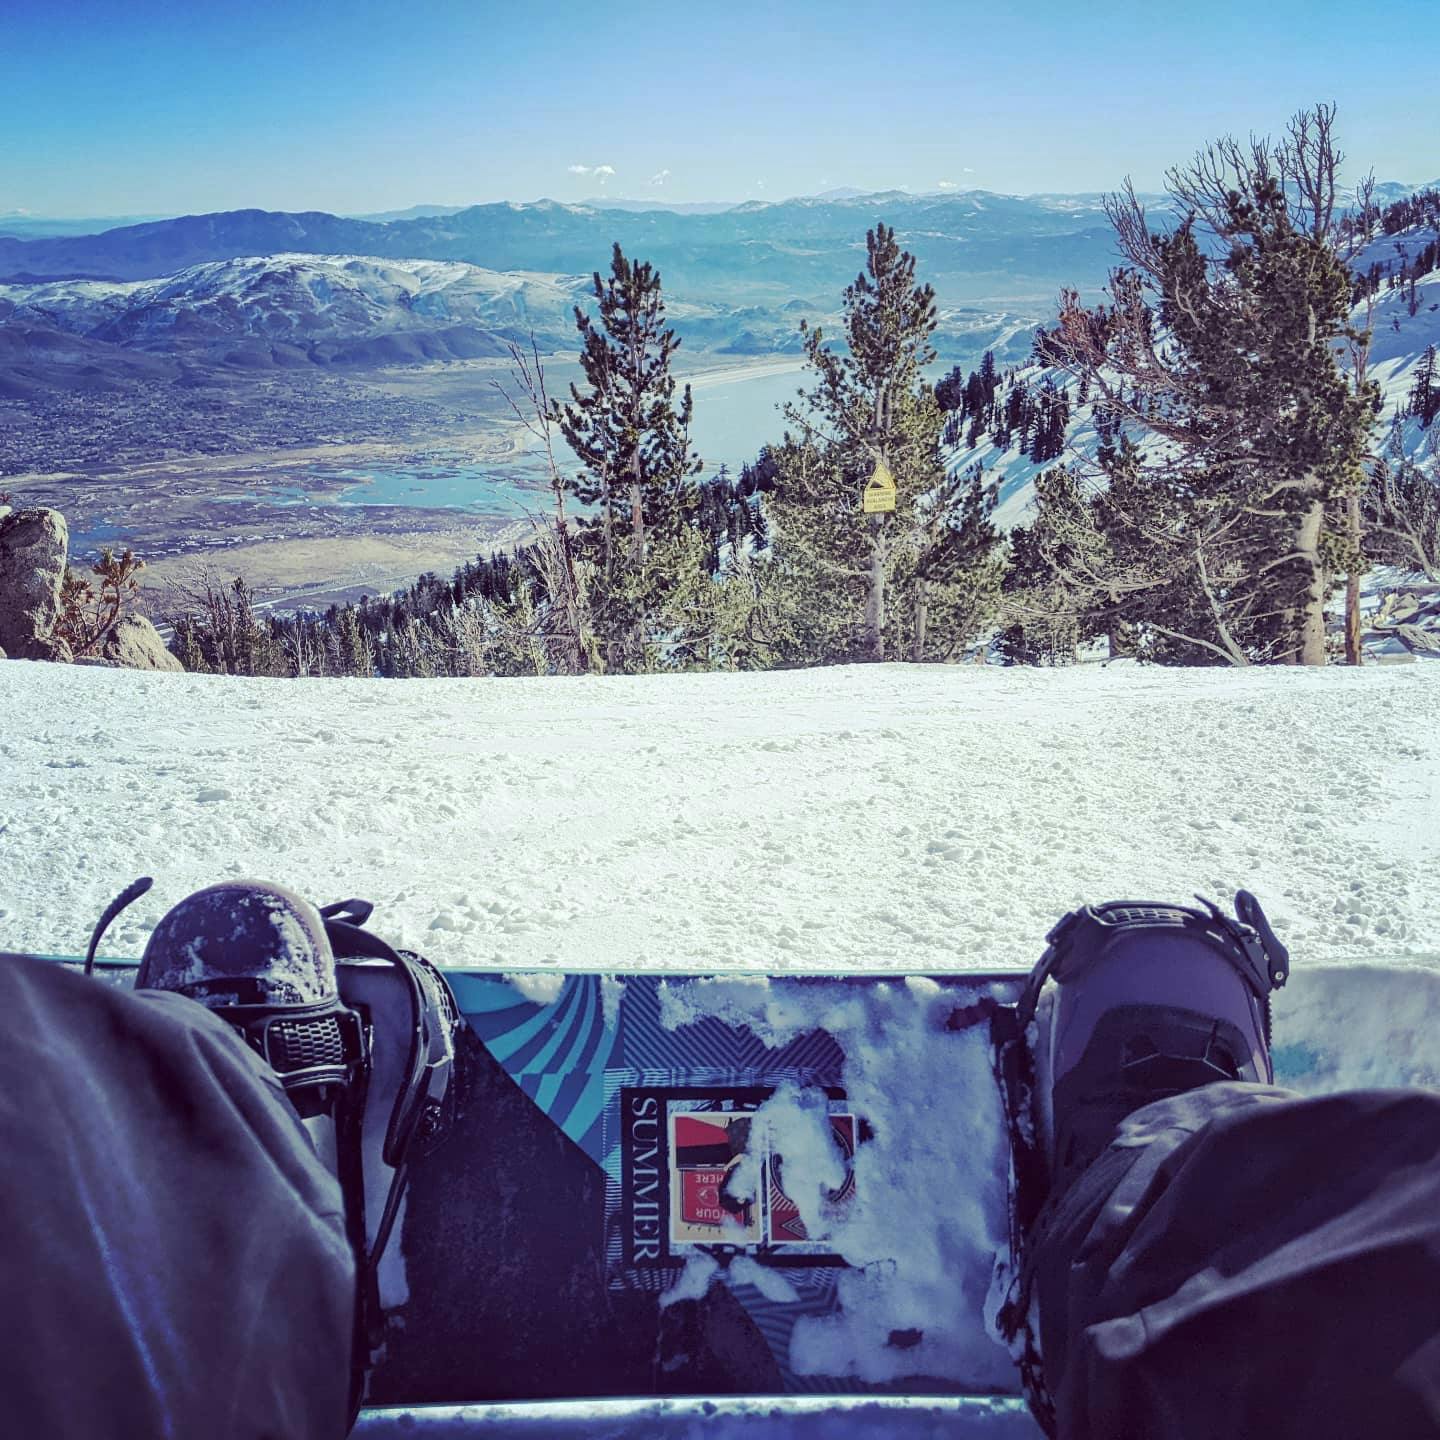 Top down view of a snowboard at the top of a ski run. You can see the valley and mountains in the background. 